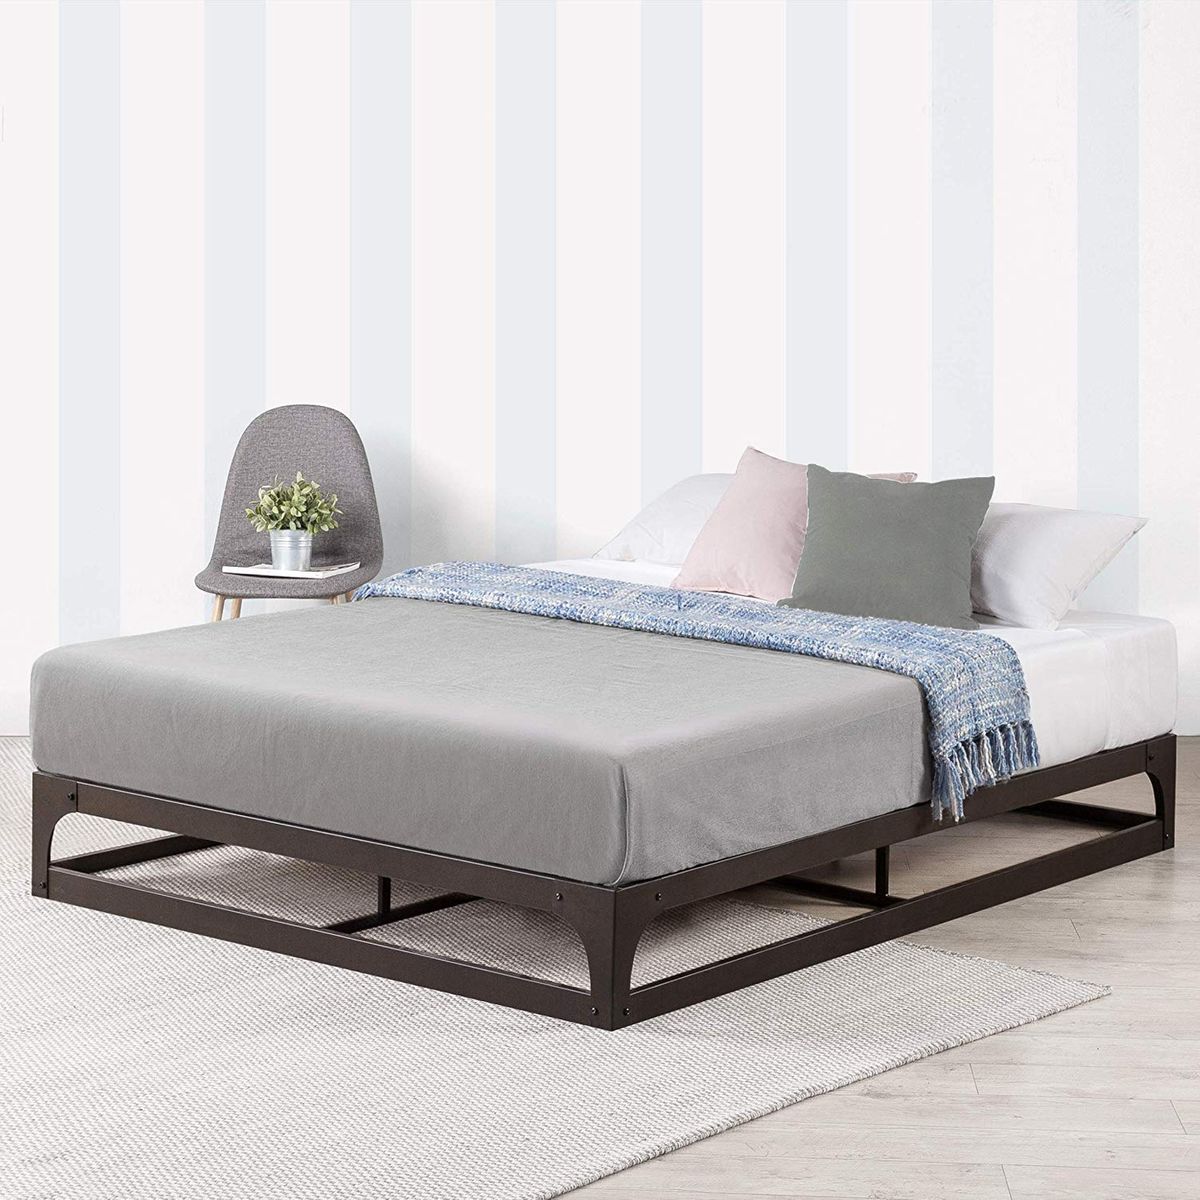 19 Best Metal Bed Frames 2020 The, Cute Full Size Bed Frames